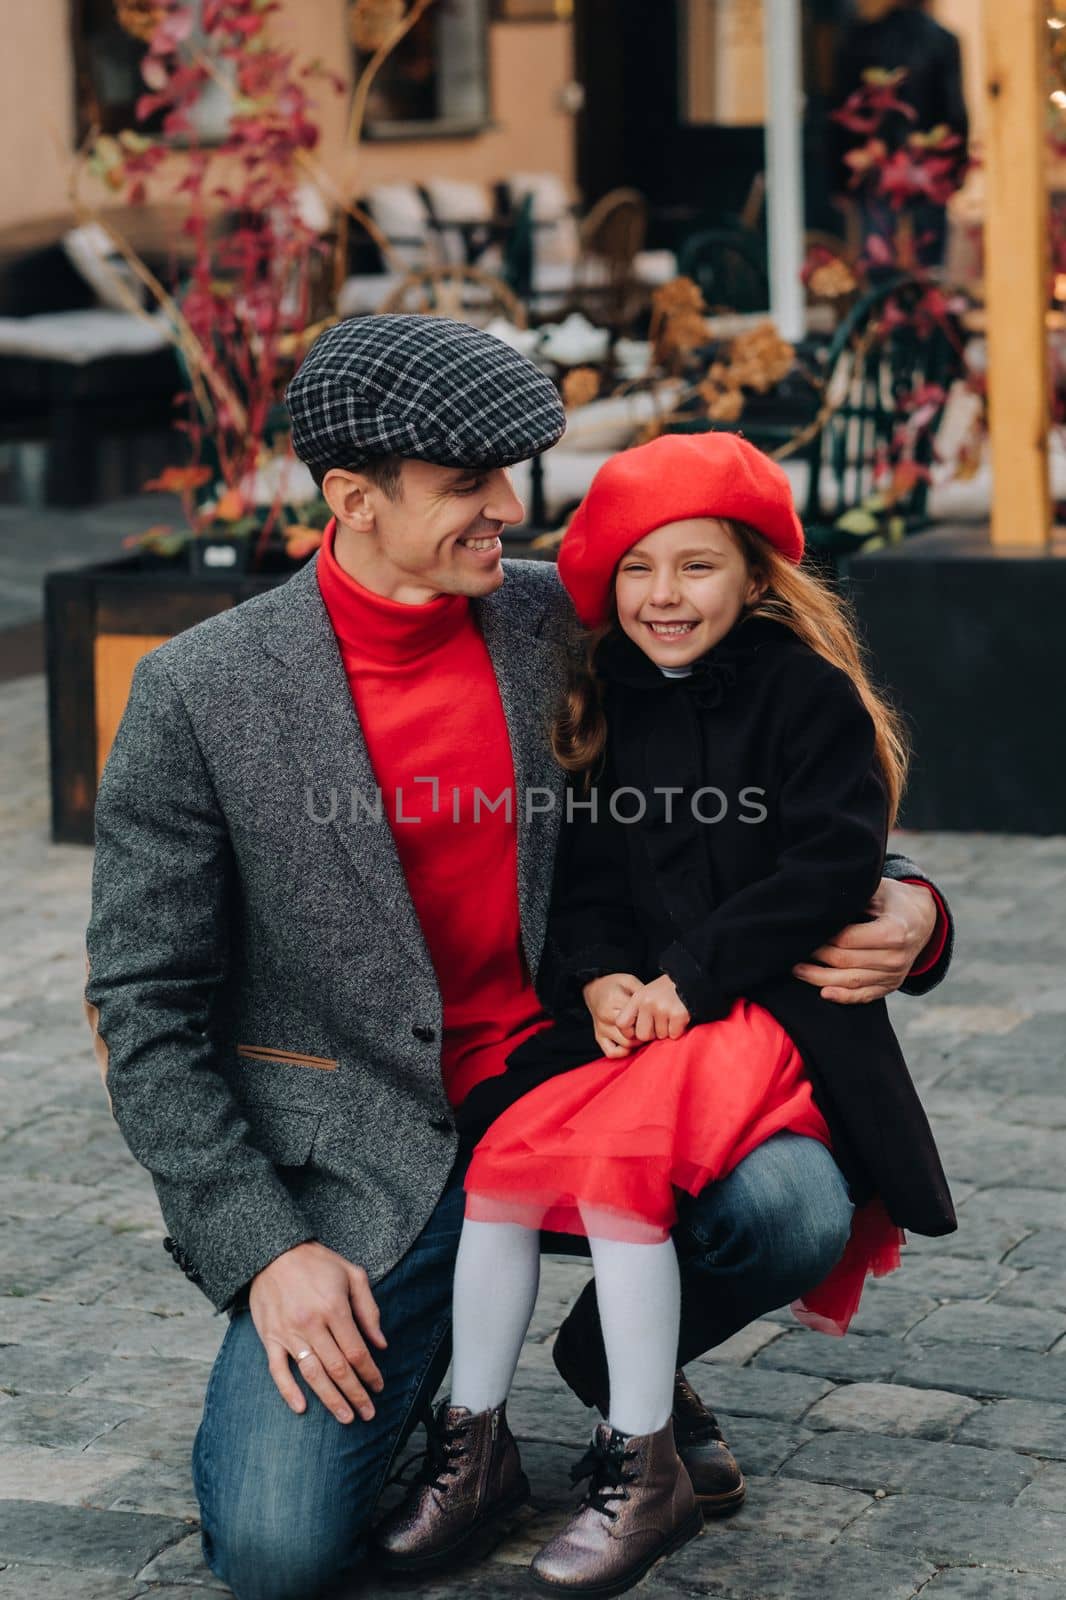 Portrait of a father and daughter sitting on a knee and being on a city street in autumn.